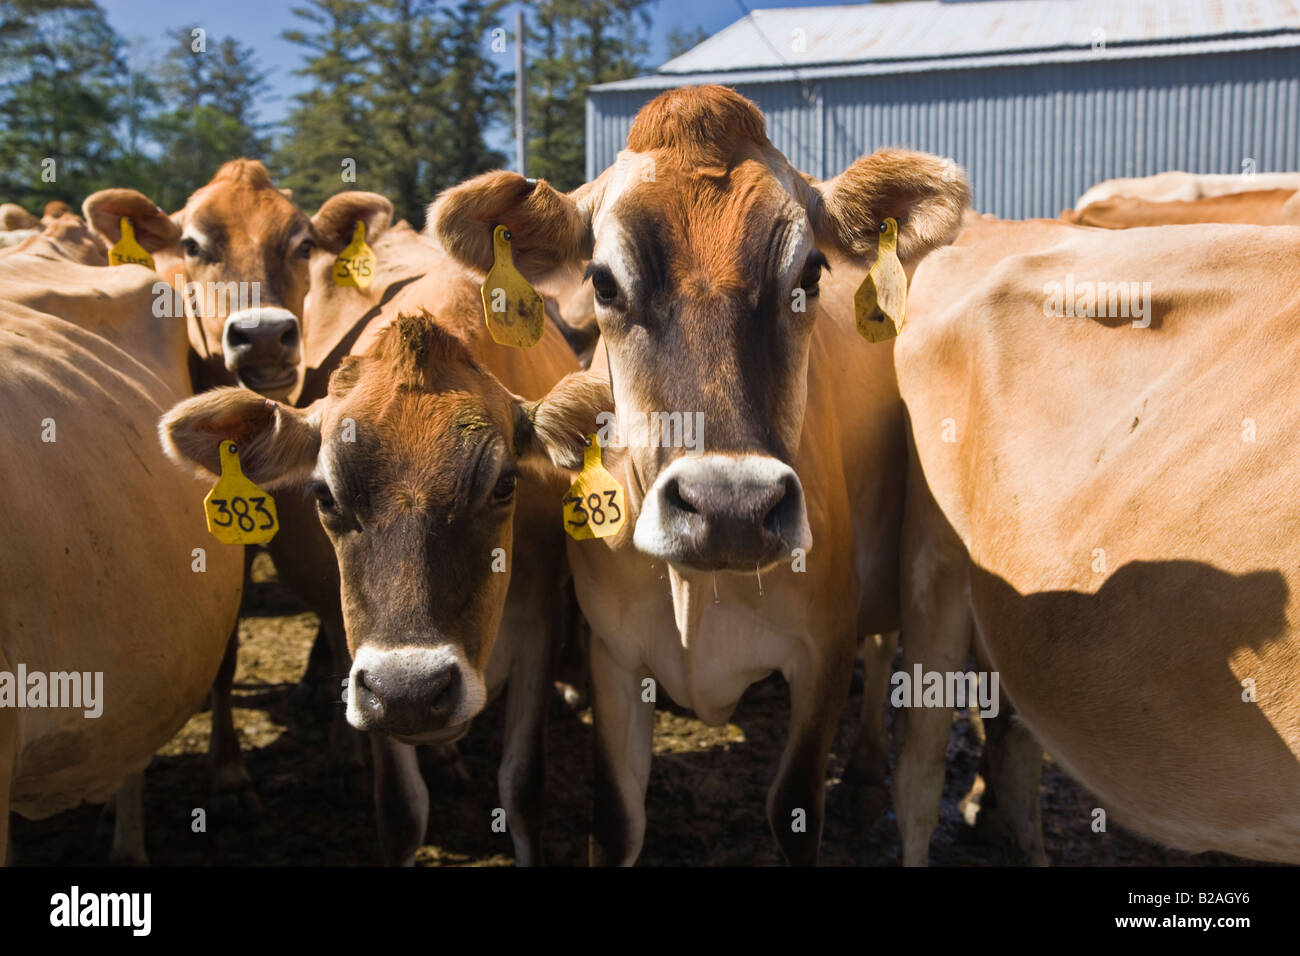 Curious Jersey cows waiting to be milked. Stock Photo